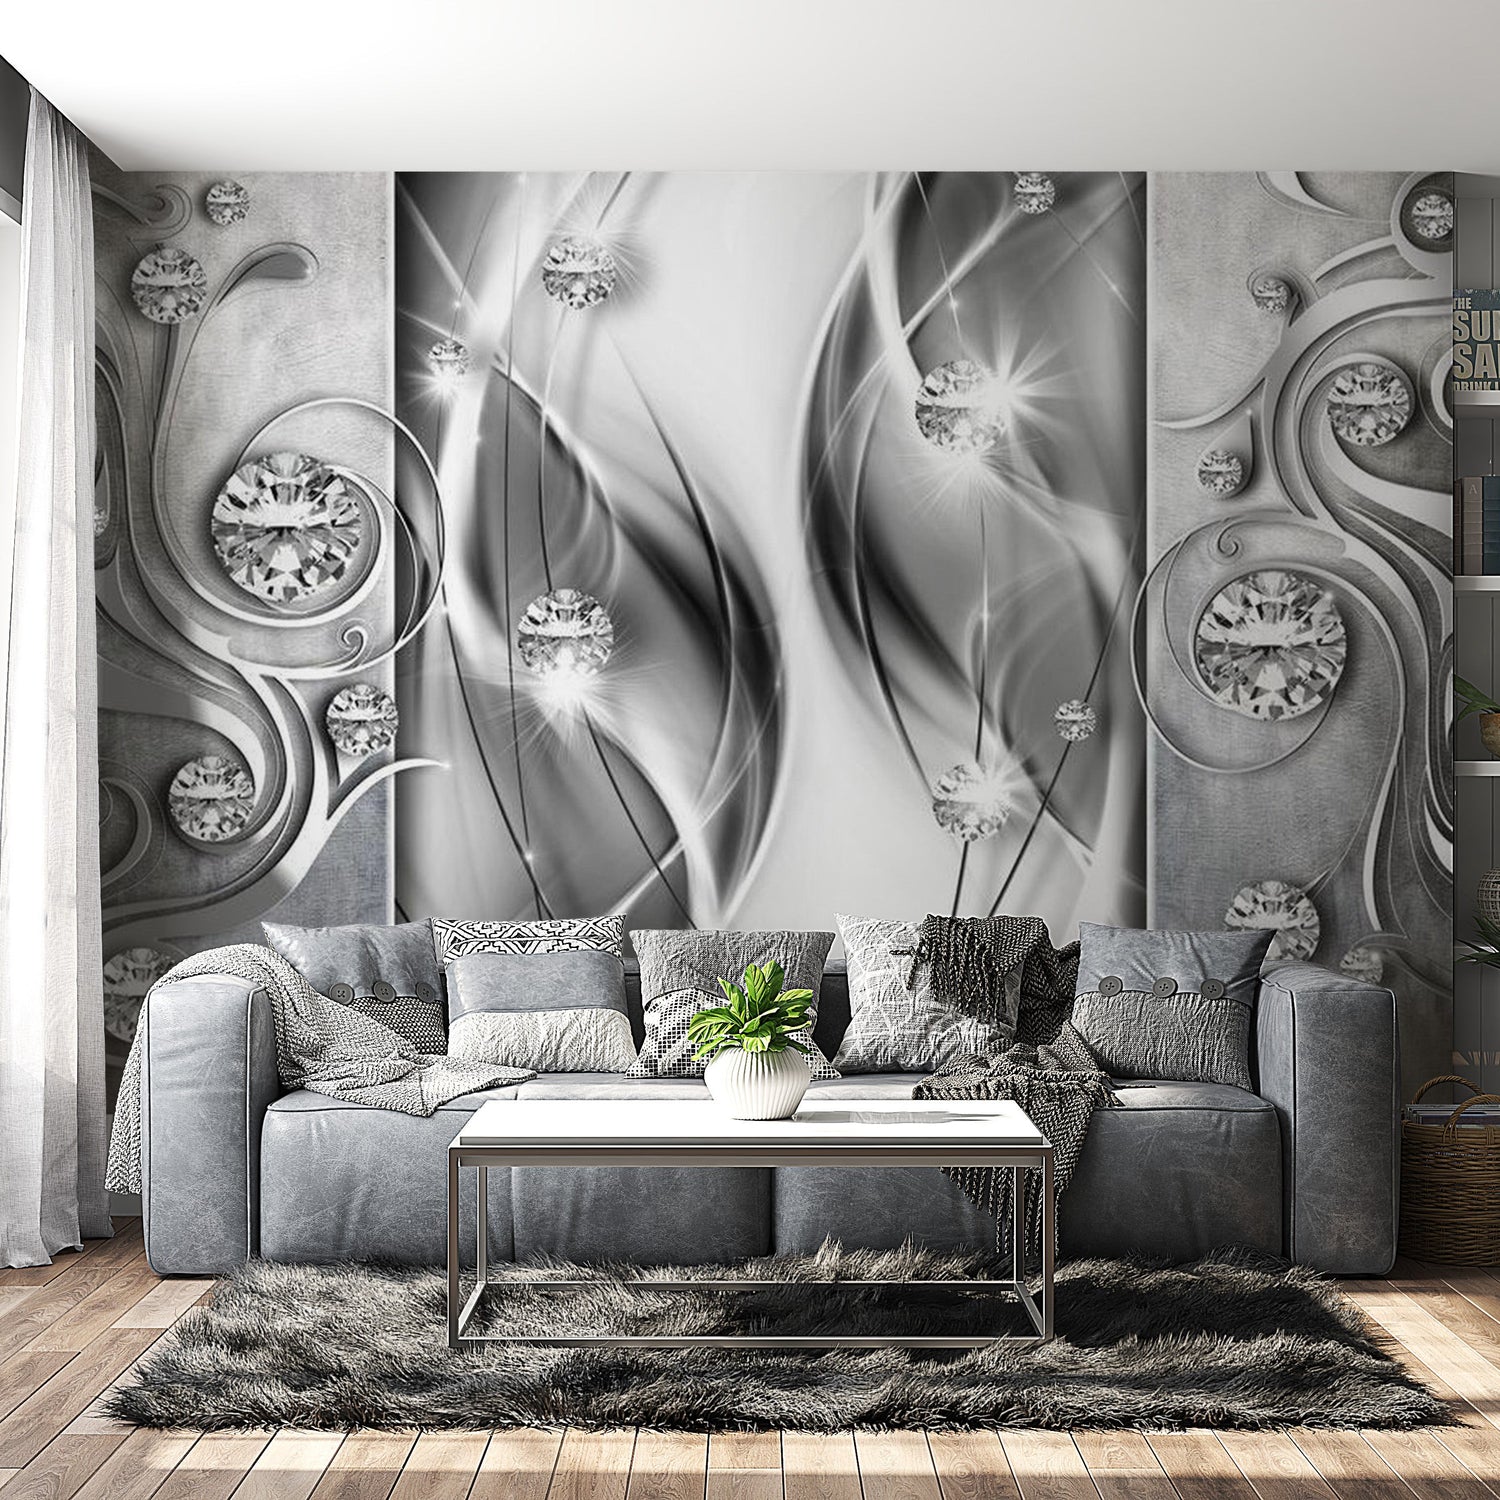 Peel & Stick Glam Wall Mural - Diamonds In Silver - Removable Wall Decals